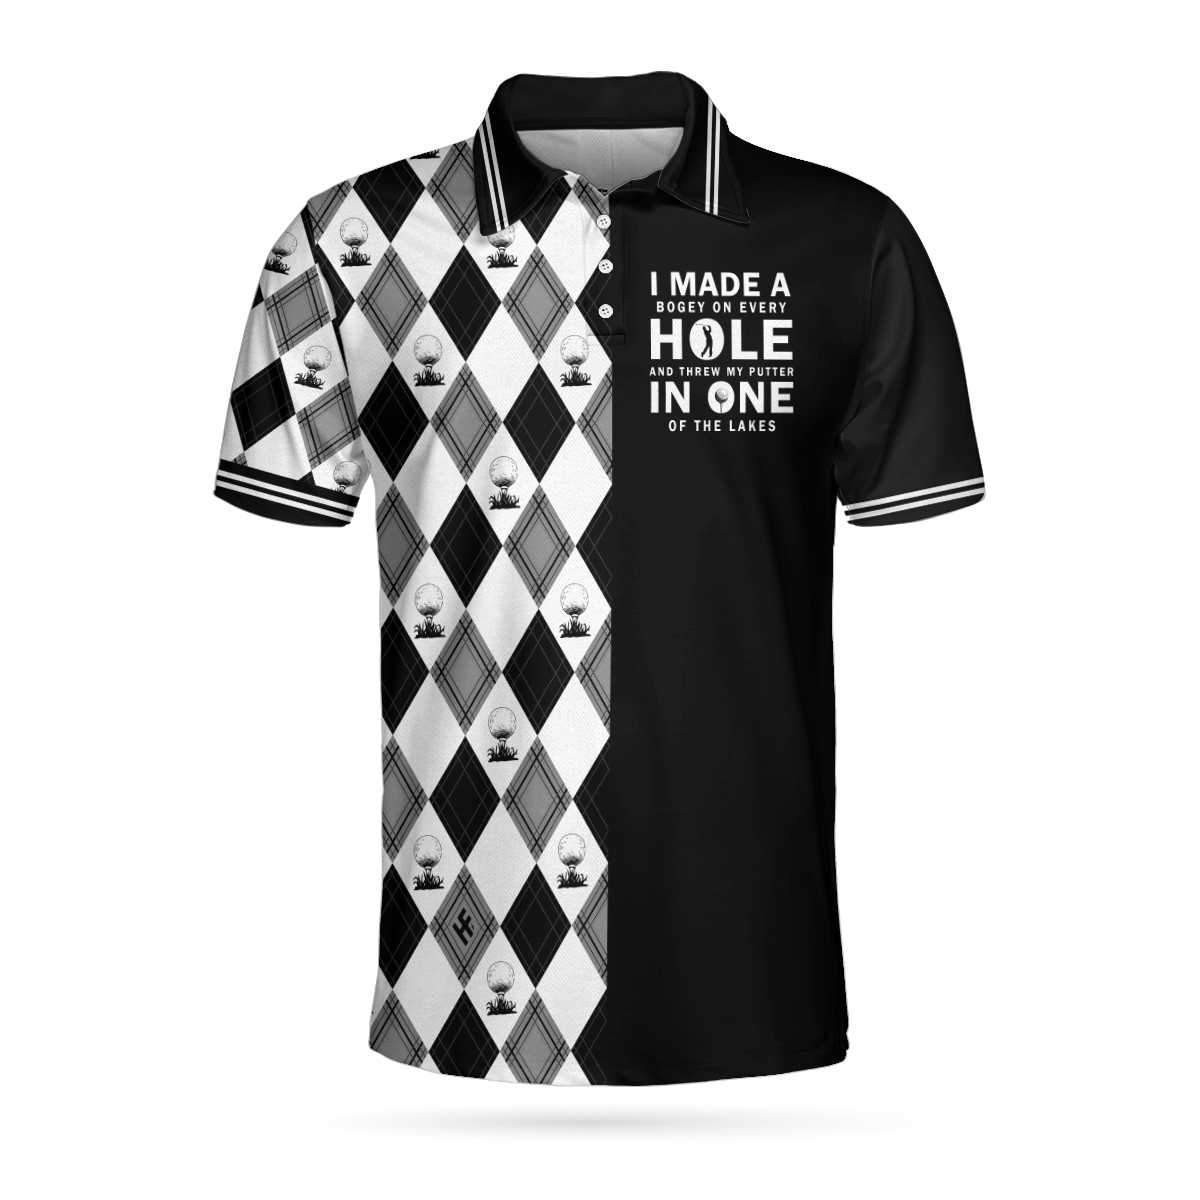 I Made A Bogey On Every Hole Polo Shirt Black And White Argyle Pattern Polo Shirt Cool Golf Shirts Short Sleeve Polo For Men